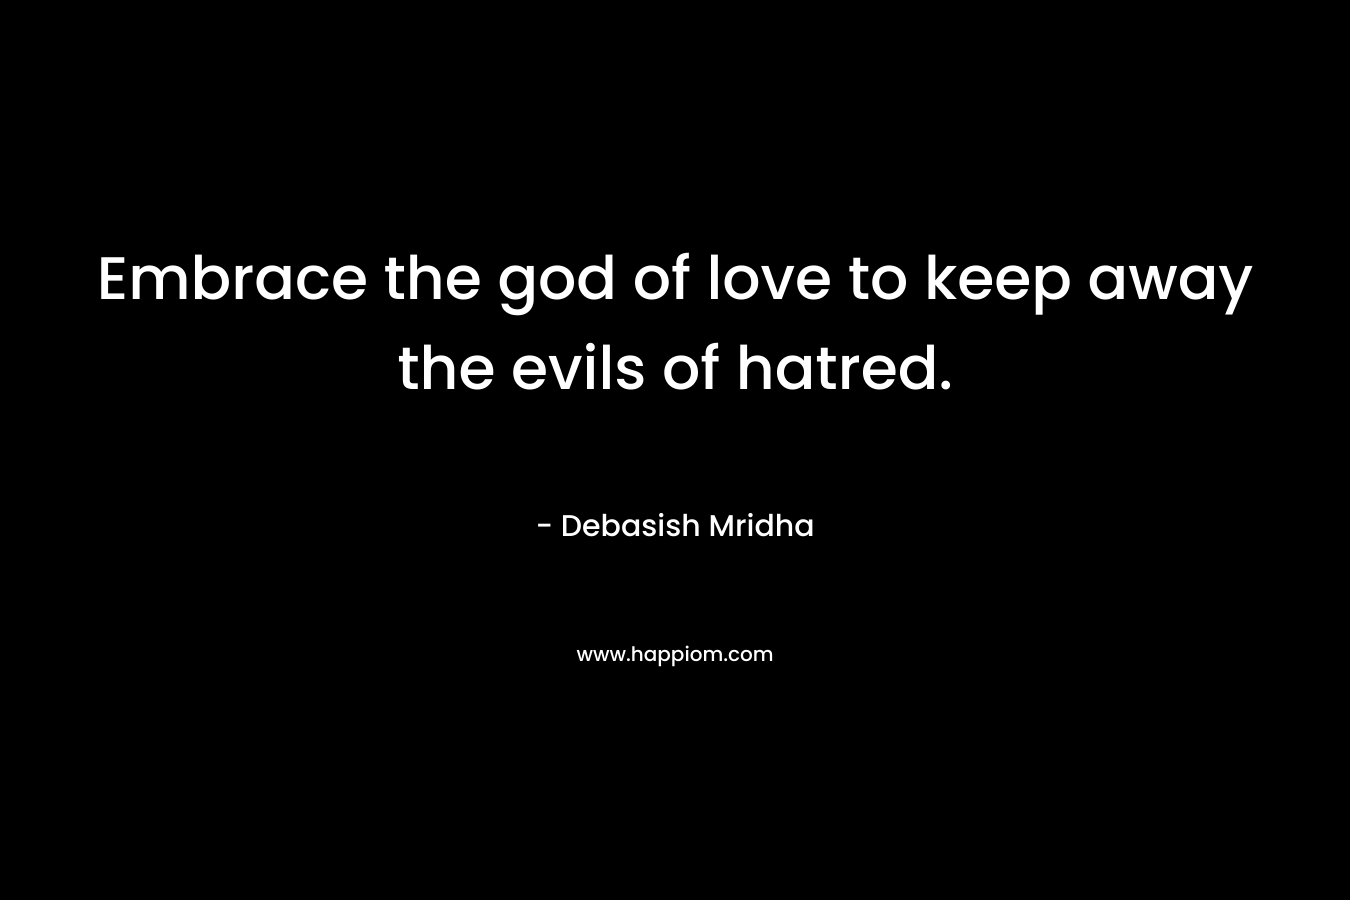 Embrace the god of love to keep away the evils of hatred. – Debasish Mridha